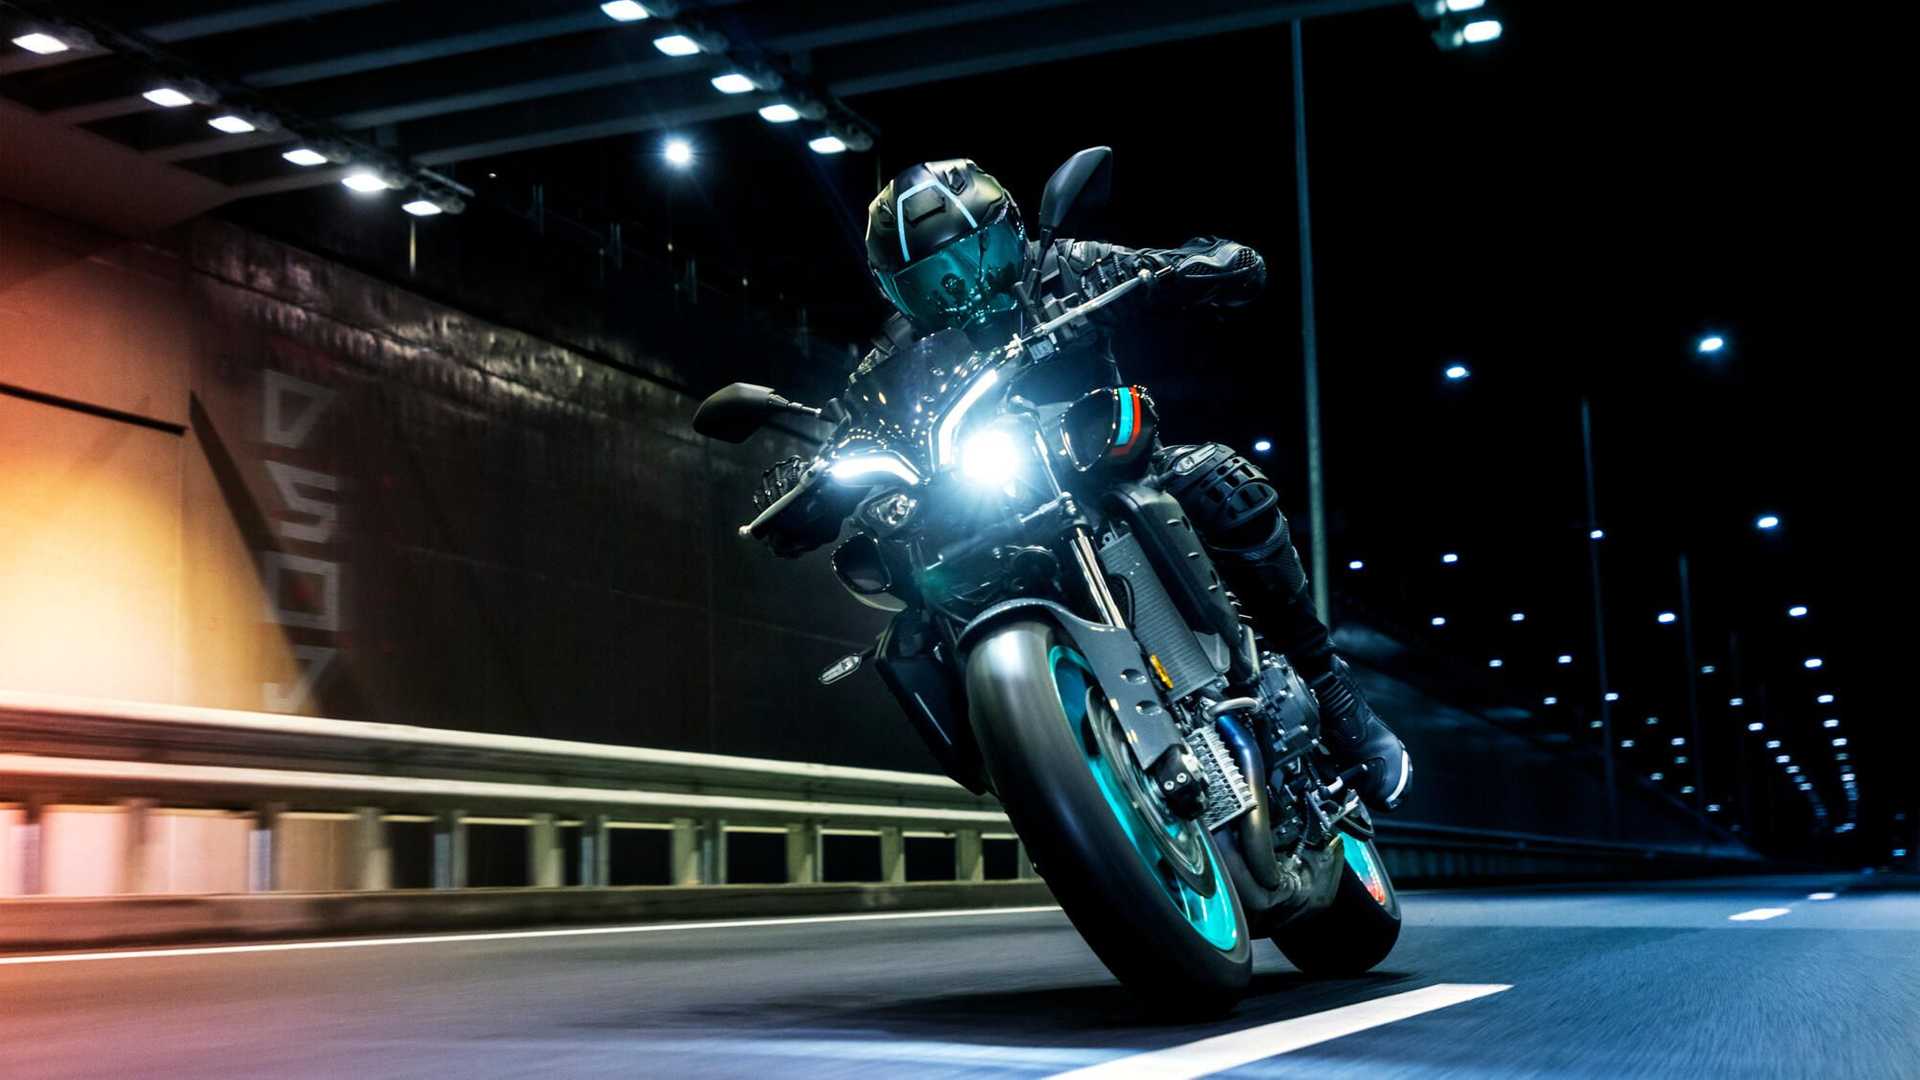 A rider on the 2022 Yamaha MT-10 riding through a tunnel at night